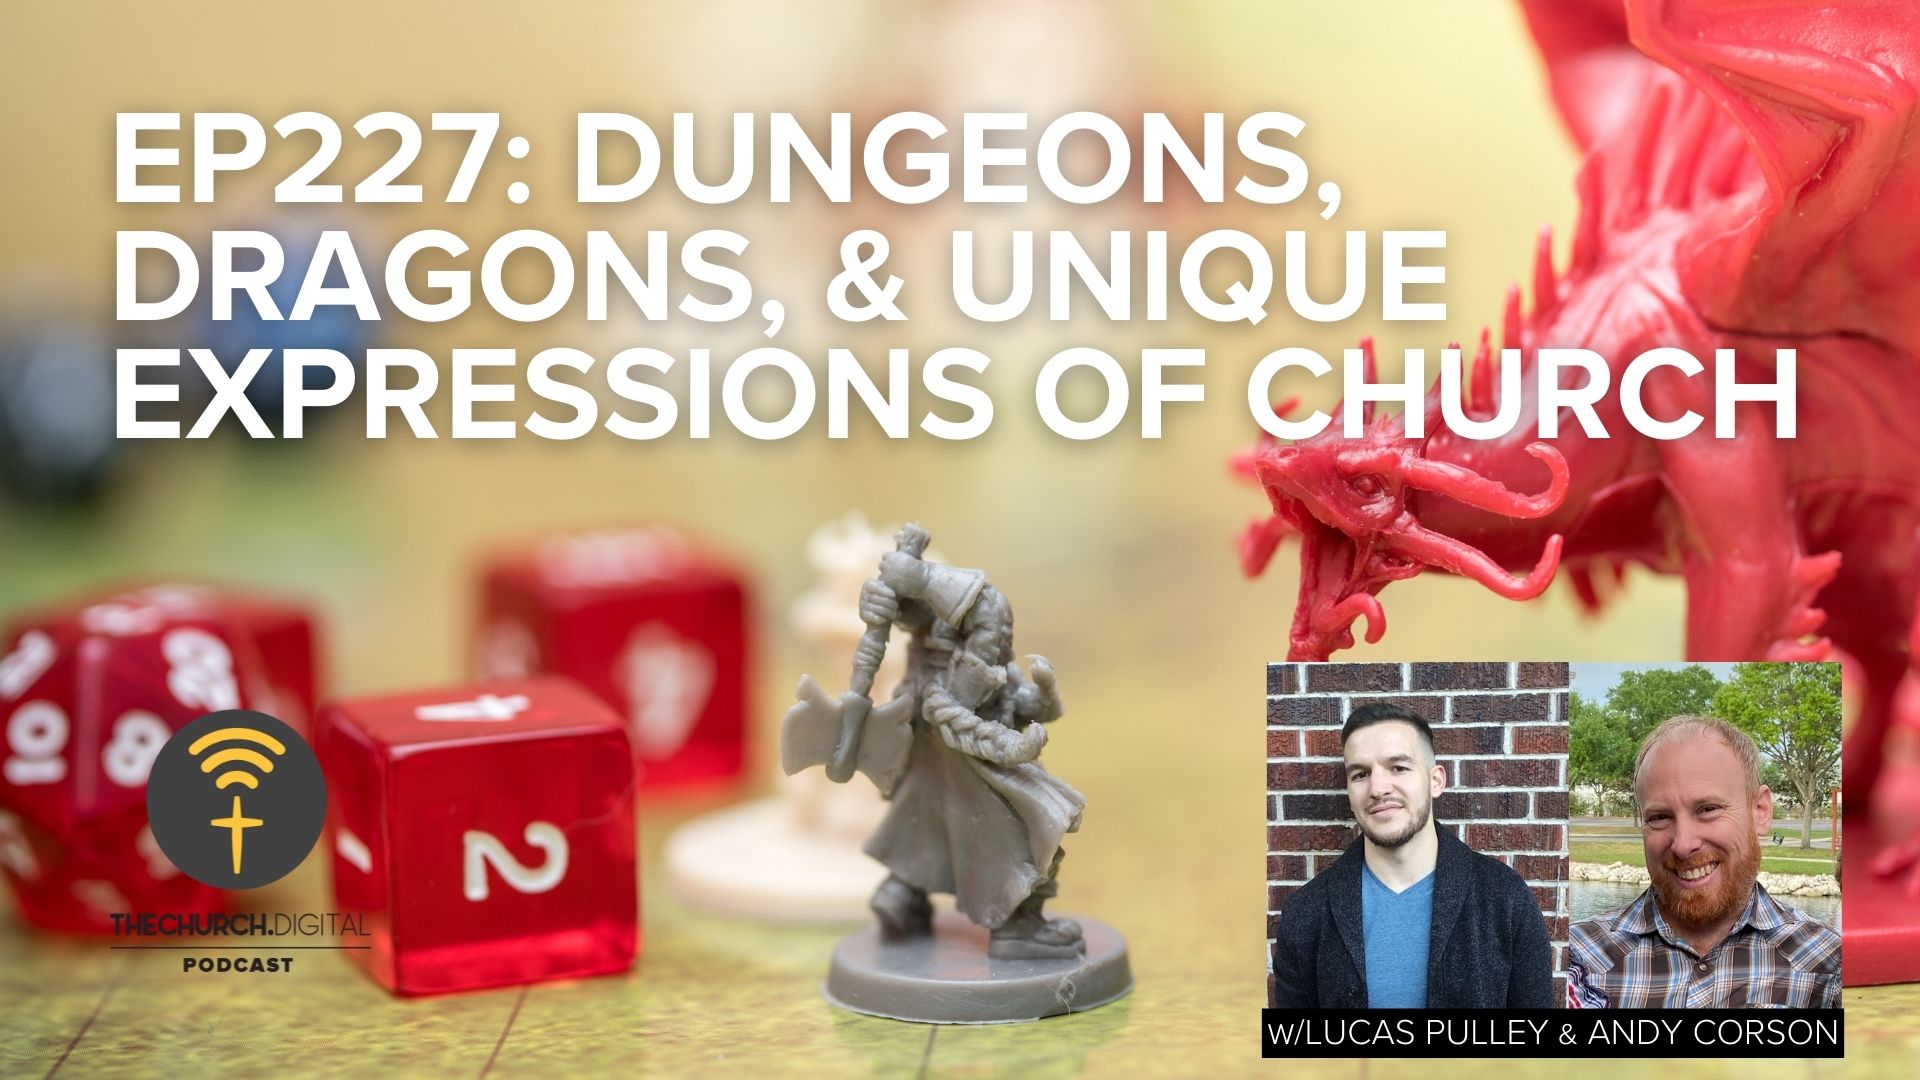 EP227: Lucas Pulley & Unique Expressions of Church